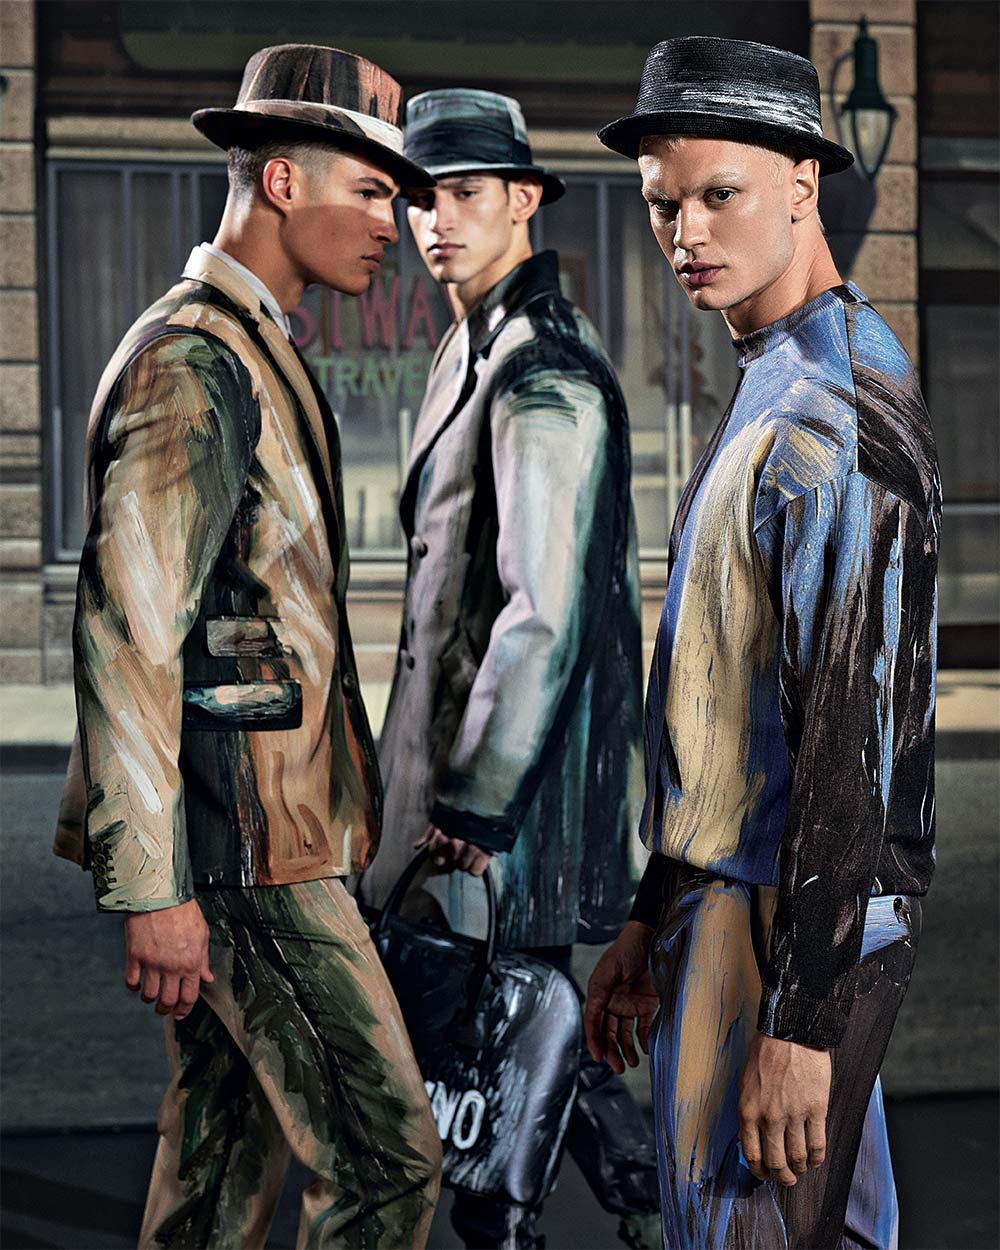 Fall Winter 2021, Alexis Chaparro, Brandon Good and Noah Luis Brown from the book "Moschino".